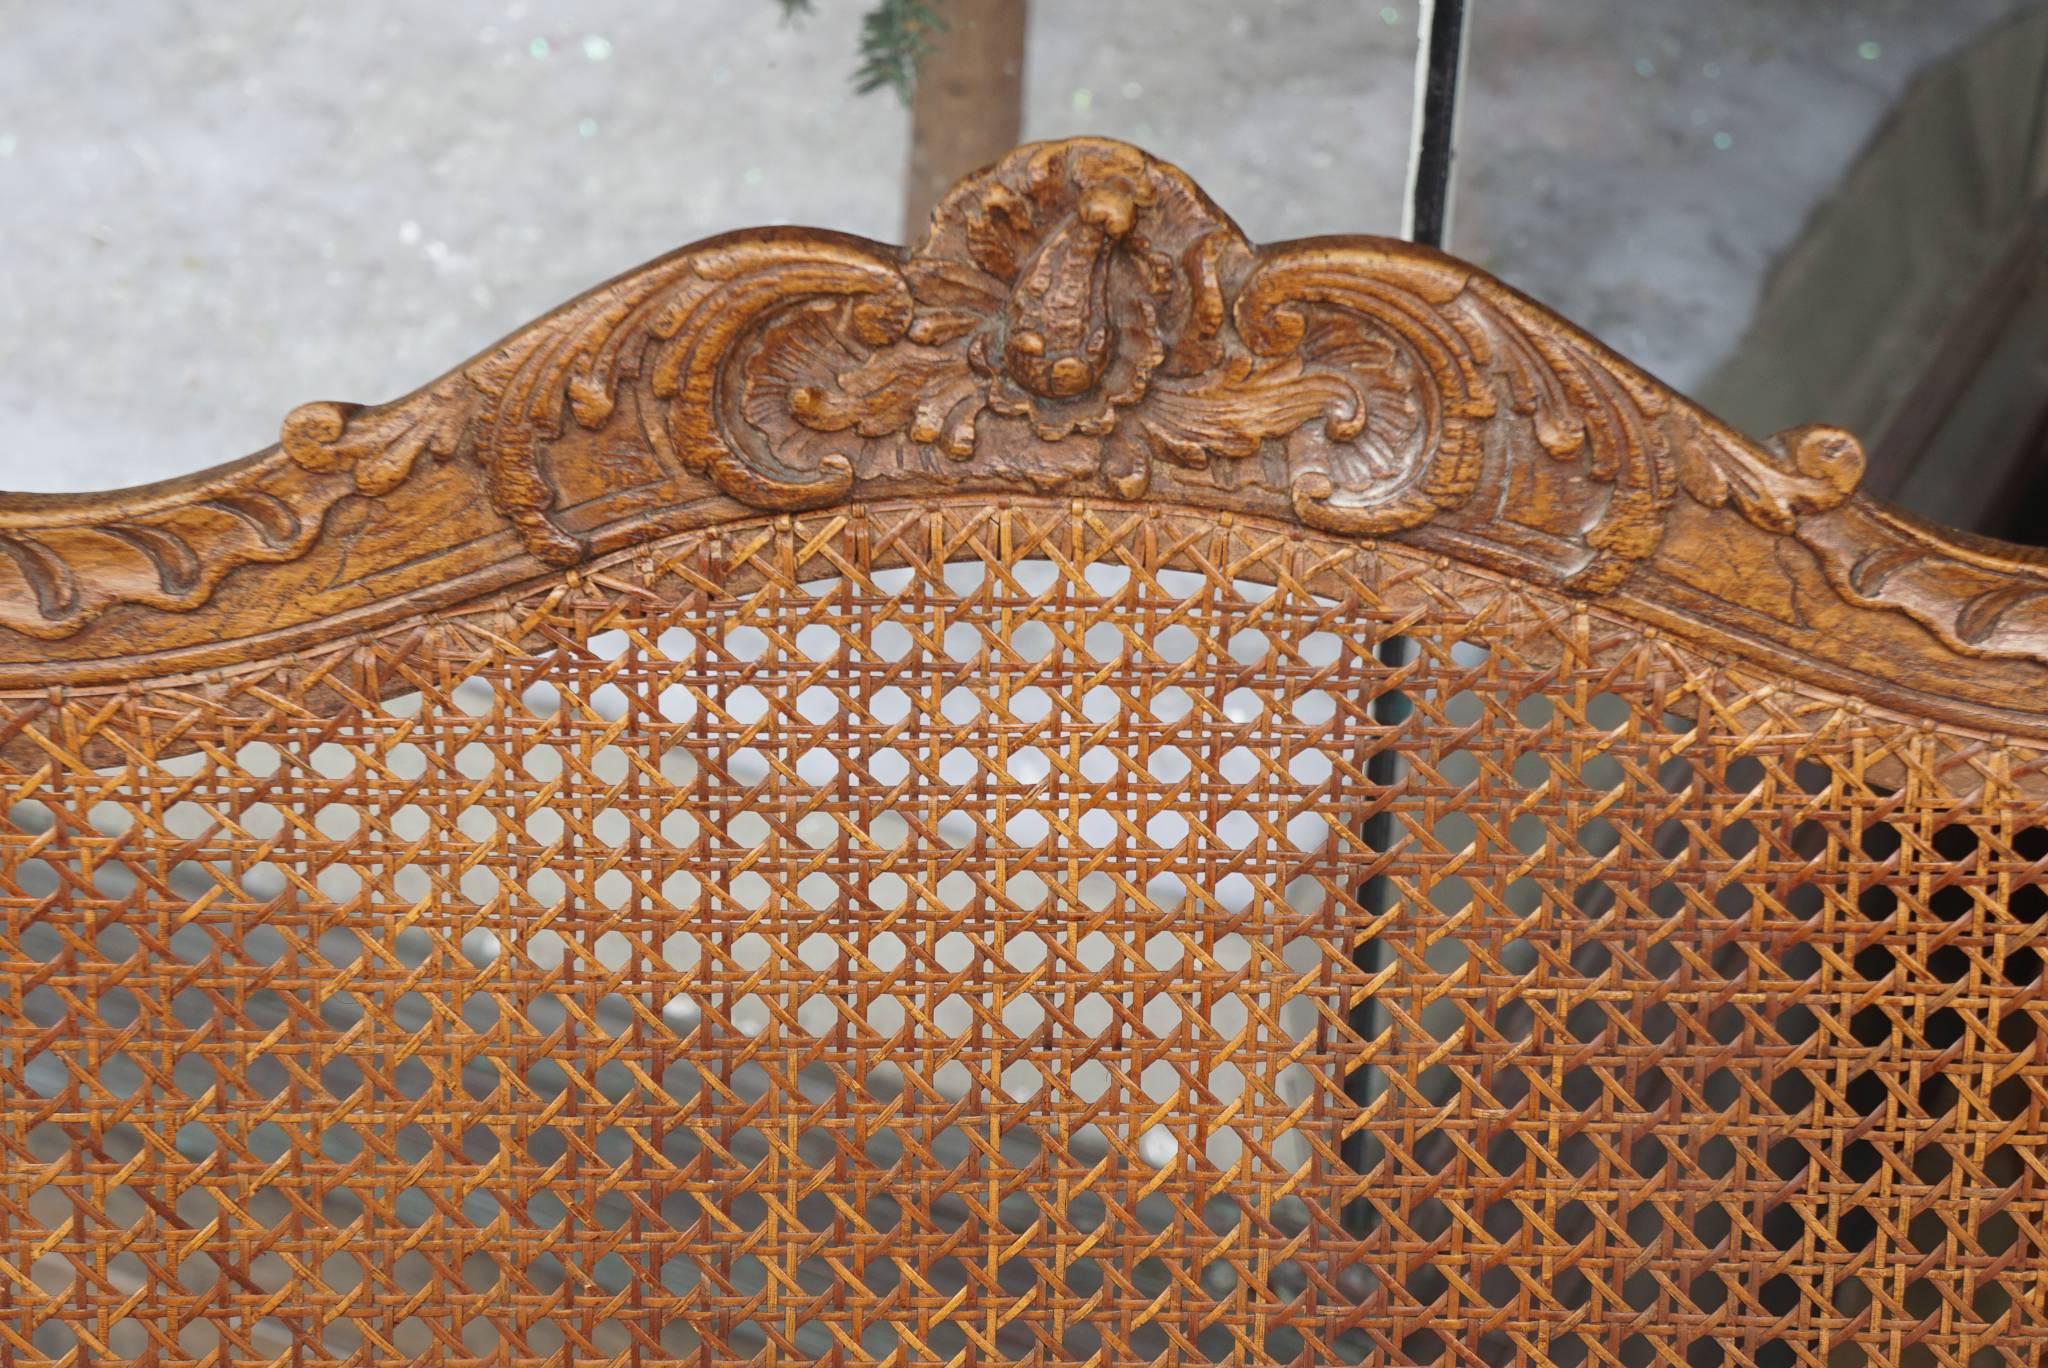 Pair of Late 19th-Early 20th Century Carved Oak Regence Fauteuils For Sale 2